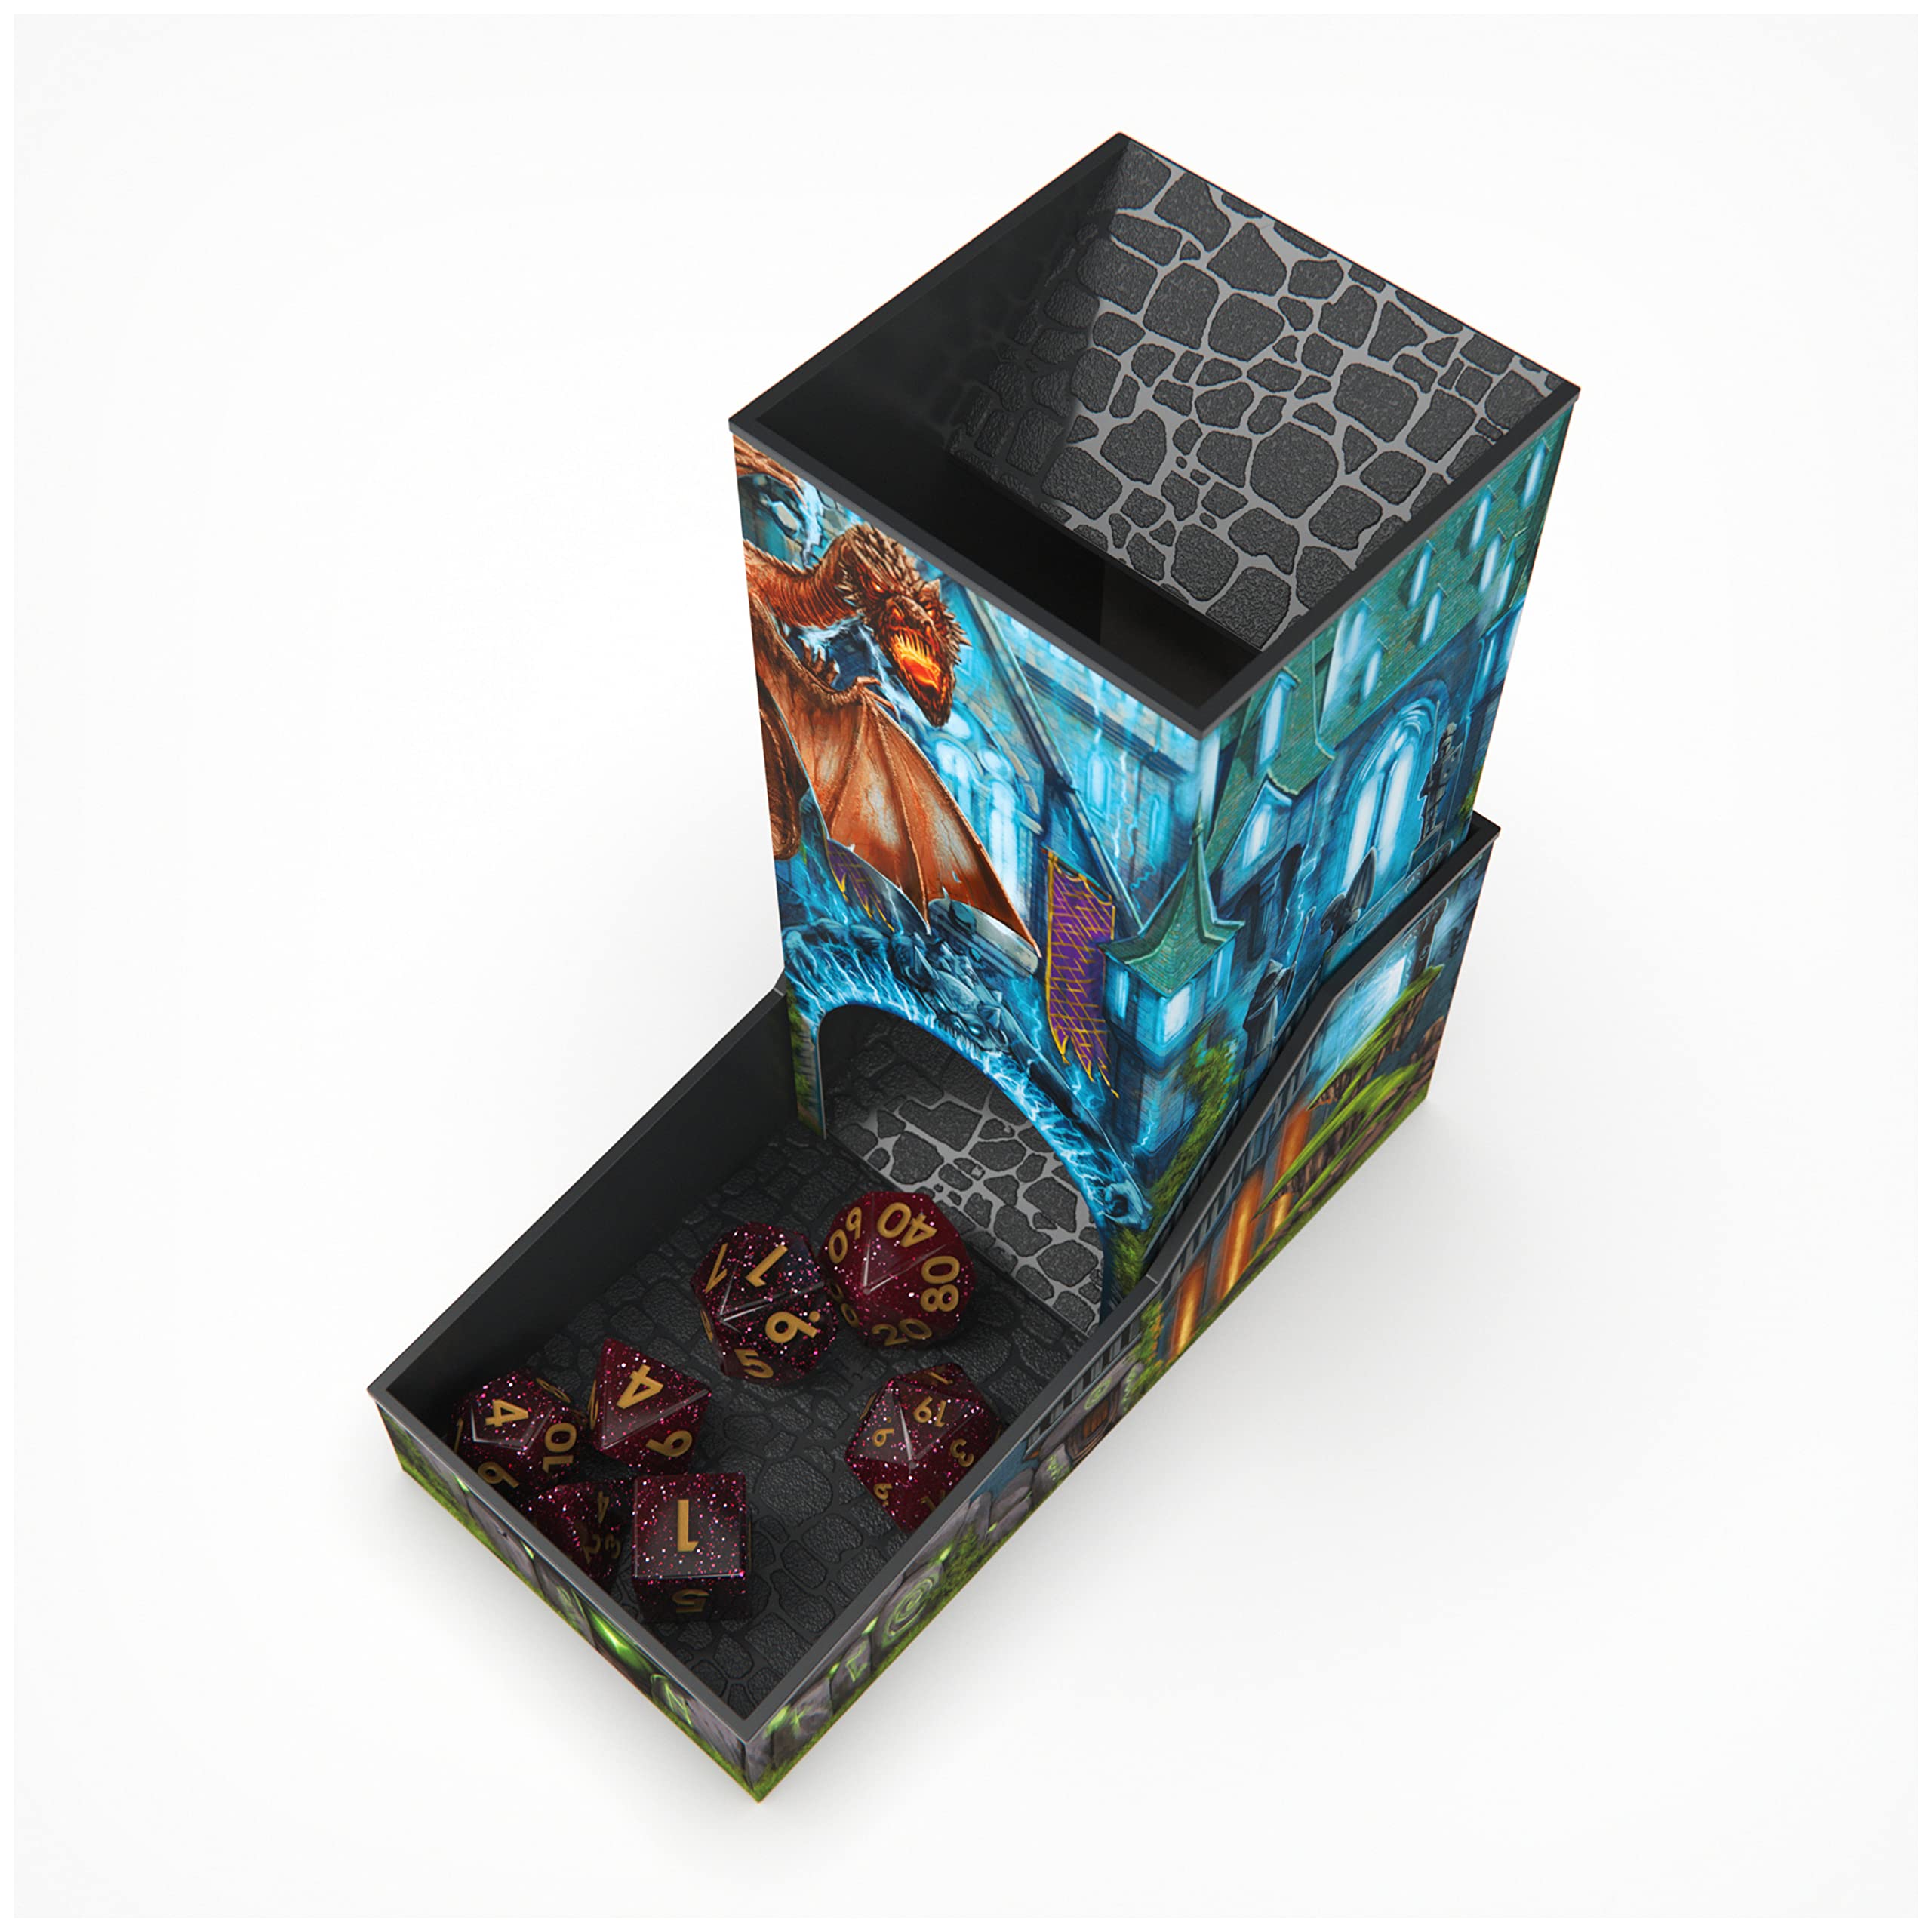 Campaign Dice Tower, Portable 7 Polyhedral Dice Role-Playing Board Games DND Dungeons Dragons MTG Magic The Gathering, for Adults & Kids Ages 8 and up